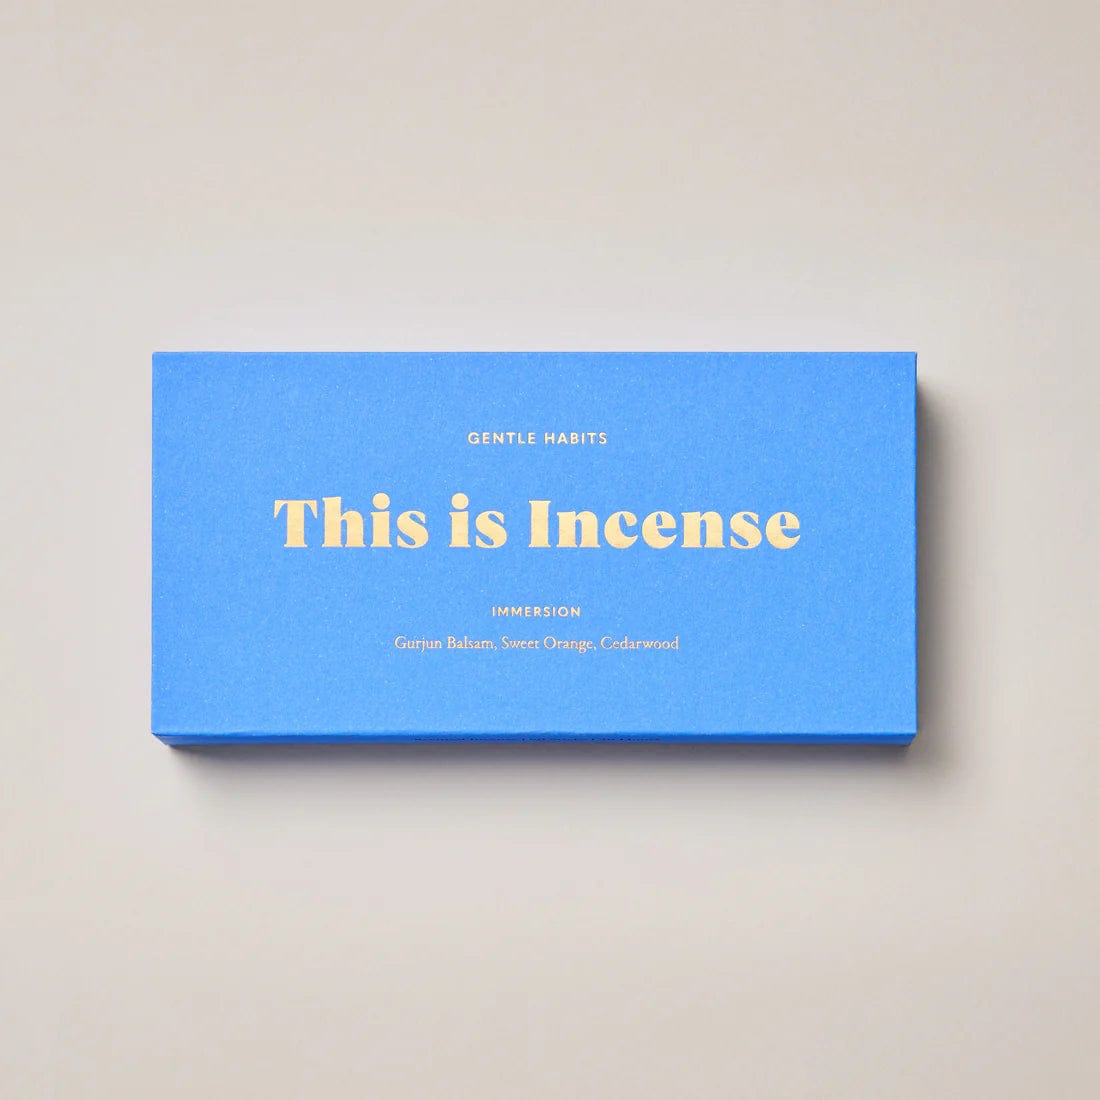 This Is Incense - IMMERSION by Gentle Habits